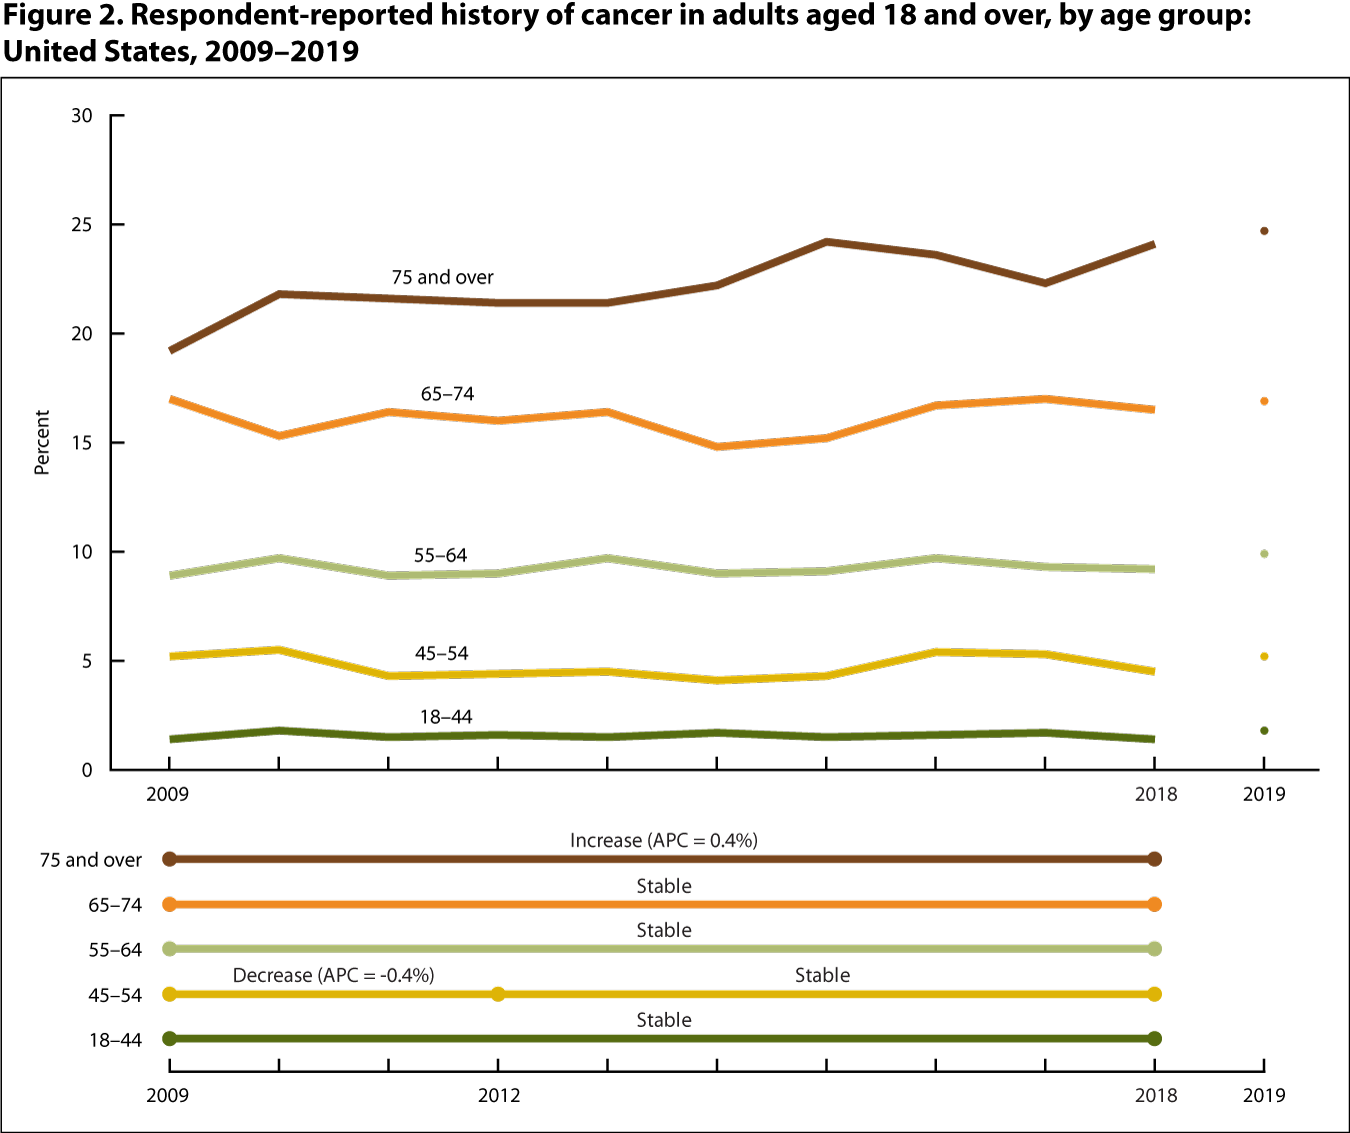 Figure 2 is a line graph showing the percentage of respondent-reported history of cancer among adults, by age group for 2009 through 2018 (line) and at 2019 (point).